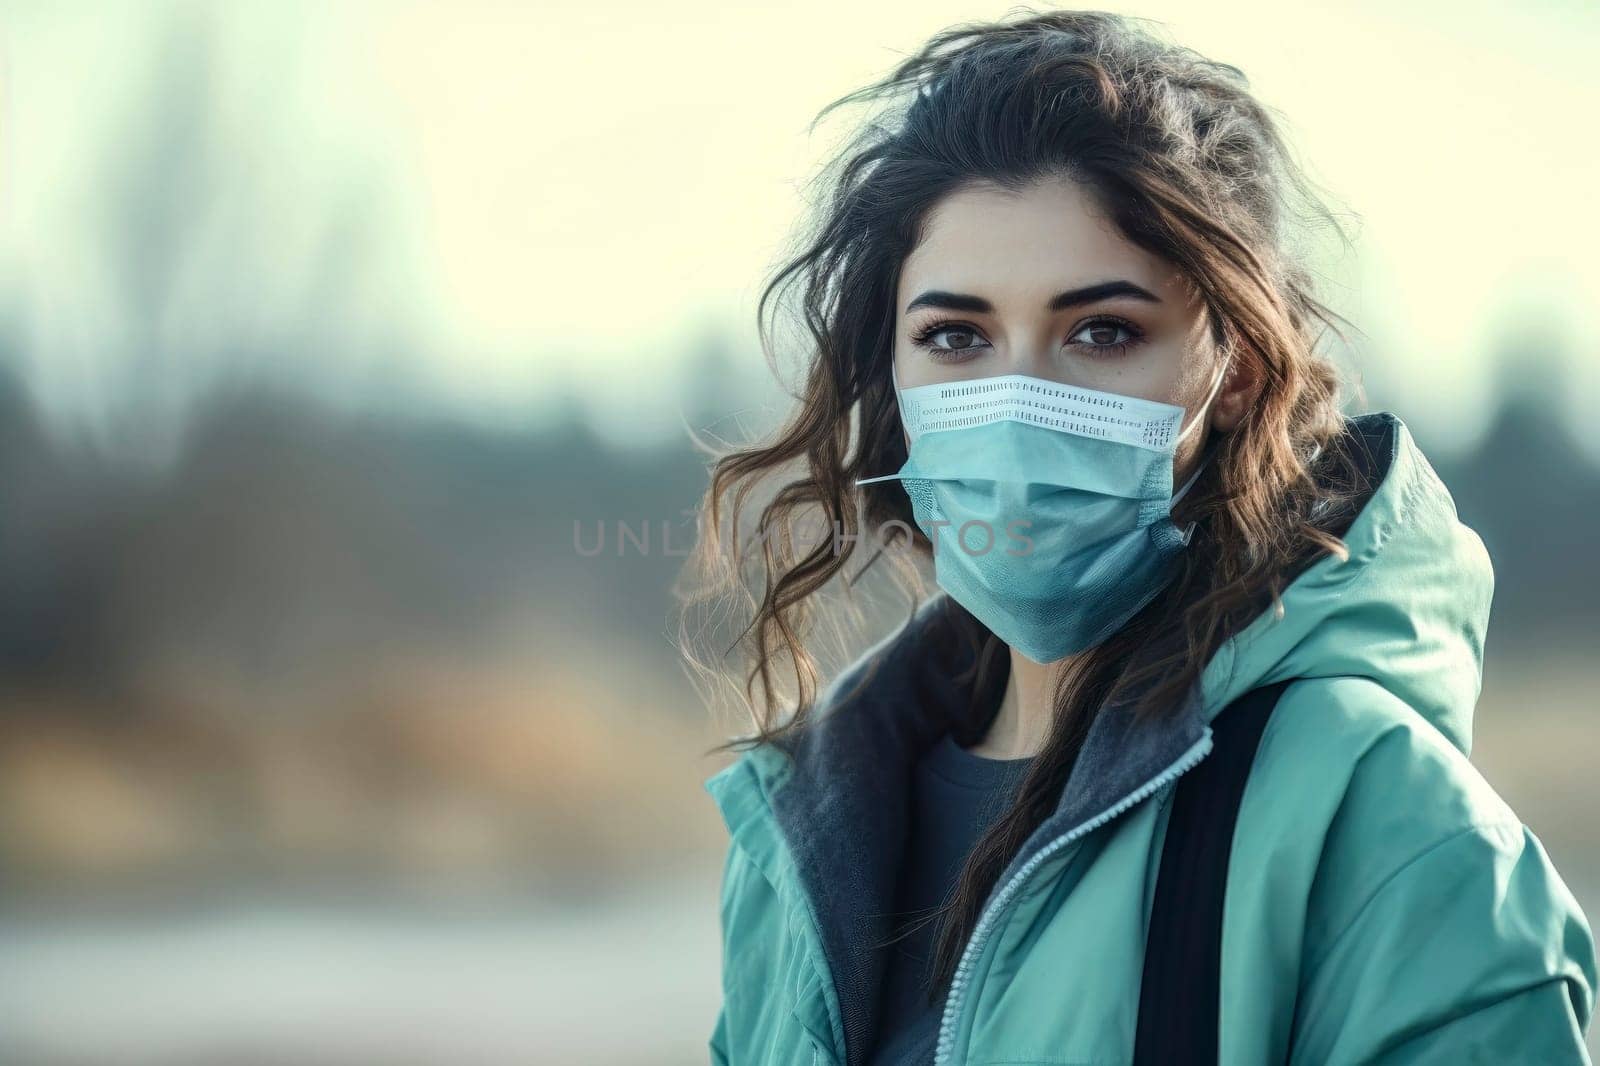 Young girl in a medical mask, symbolizing censorship during the pandemic by a corrupt government